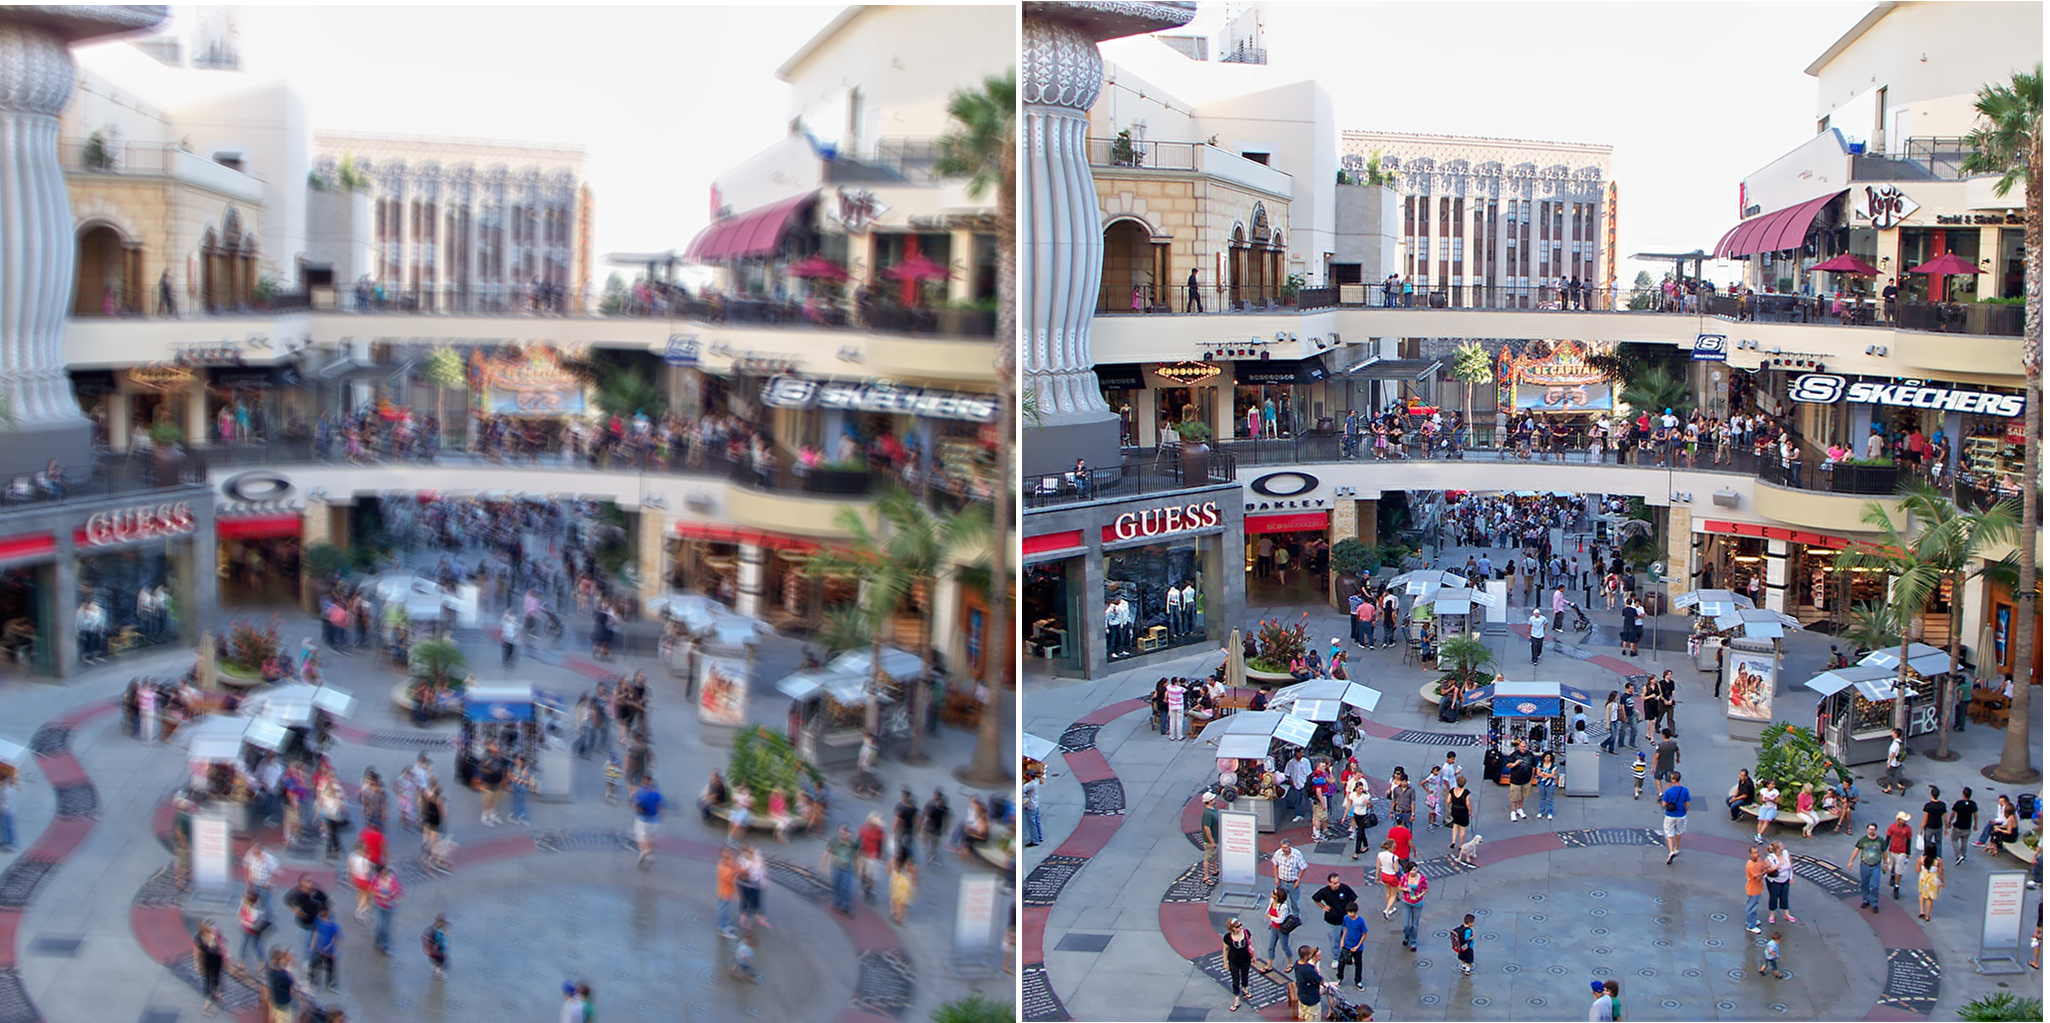 Before and After Images of a Crowded Plaza Cleaned Up with the Photoshop Deblurring Tool